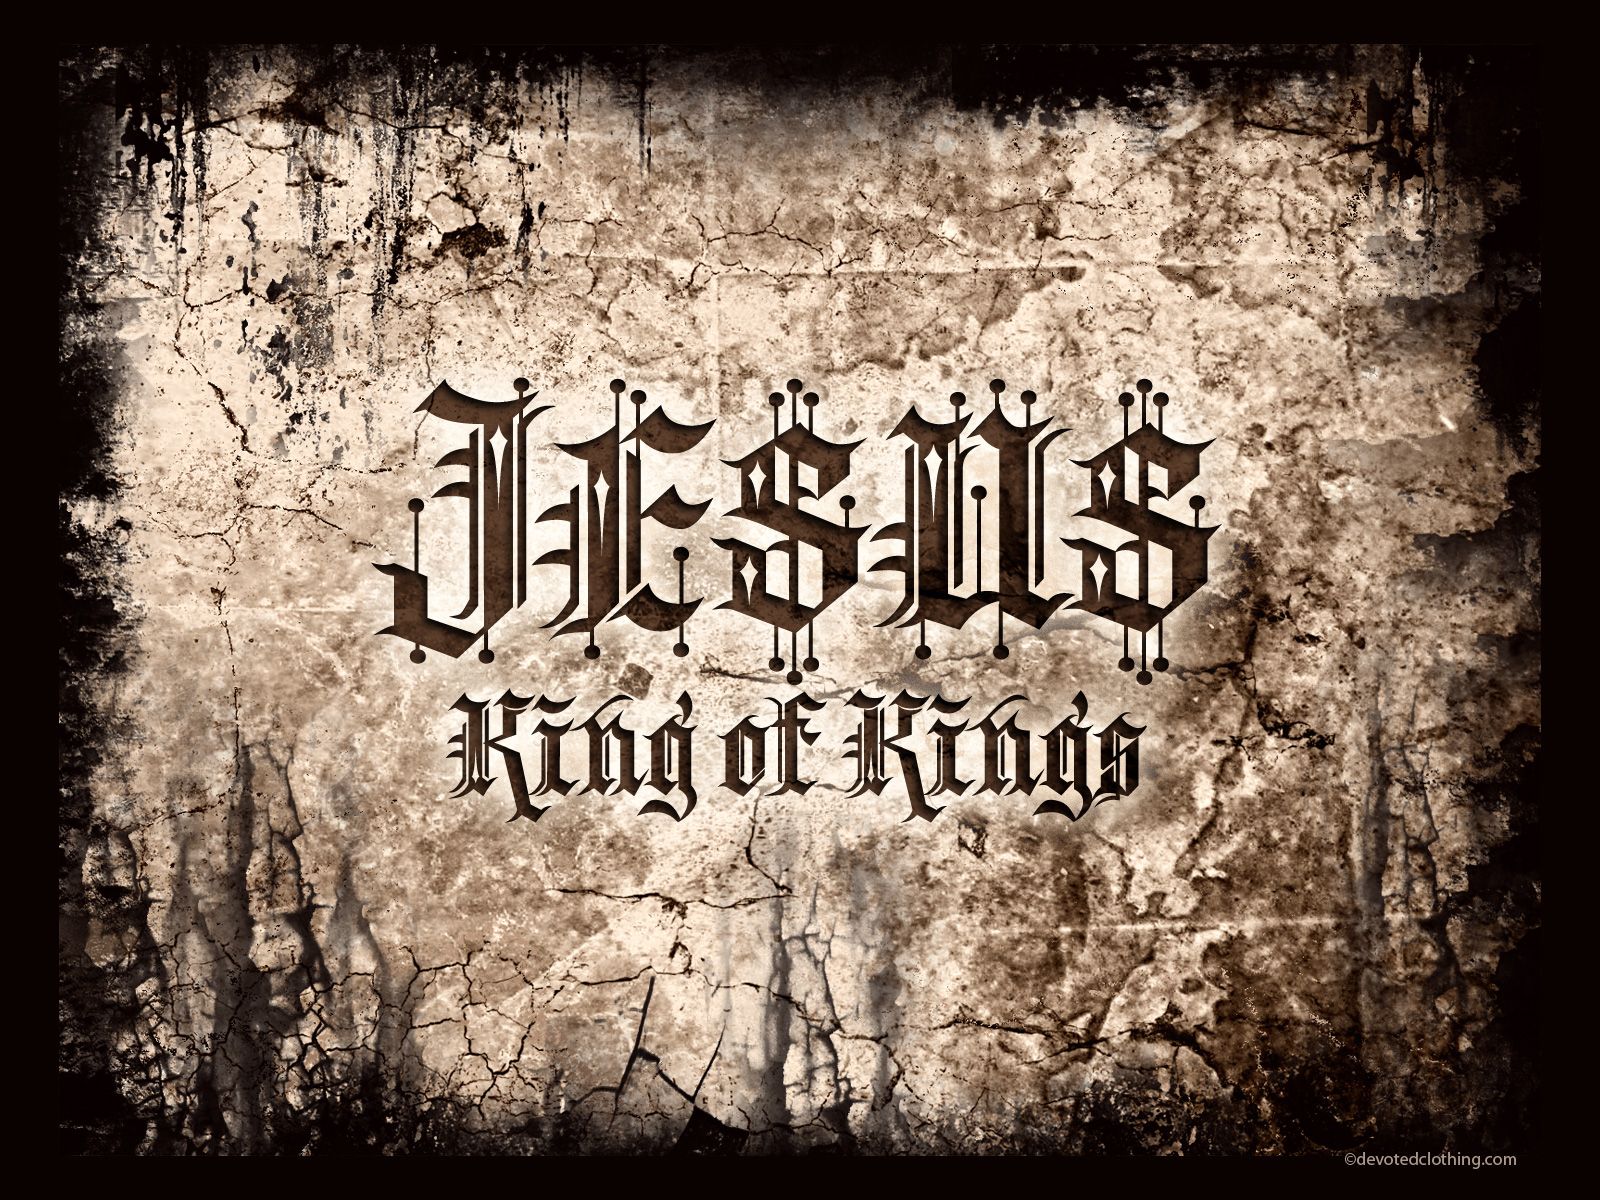 King of Kings Wallpaper   Christian Wallpapers and Backgrounds